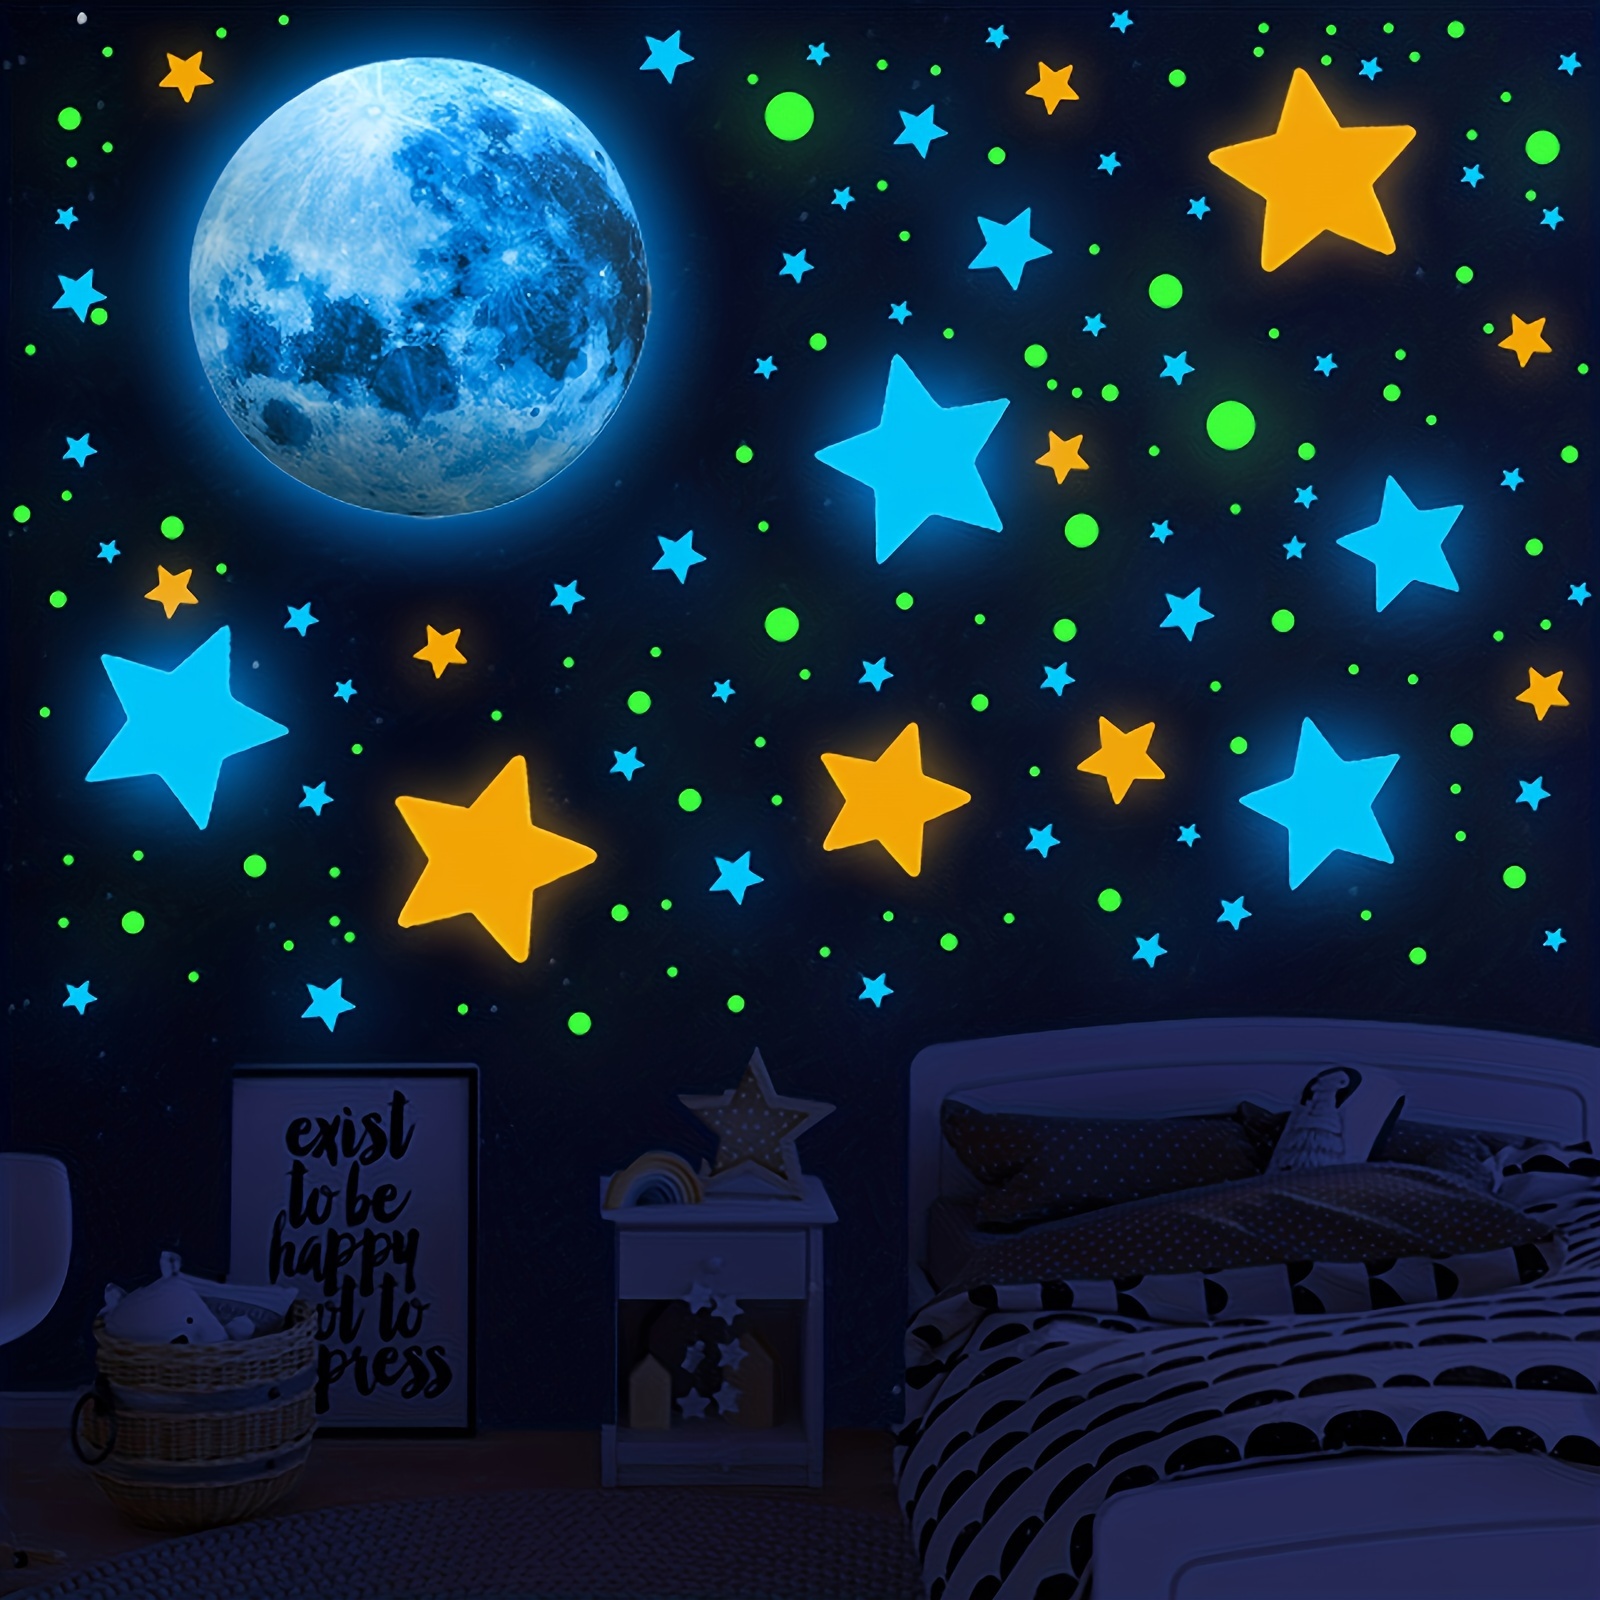 

1208-piece Glow-in-the-dark Star & Moon Ceiling Decals - Colorful Space Galaxy Wall Stickers For Bedroom, Living Room, And Home Decor